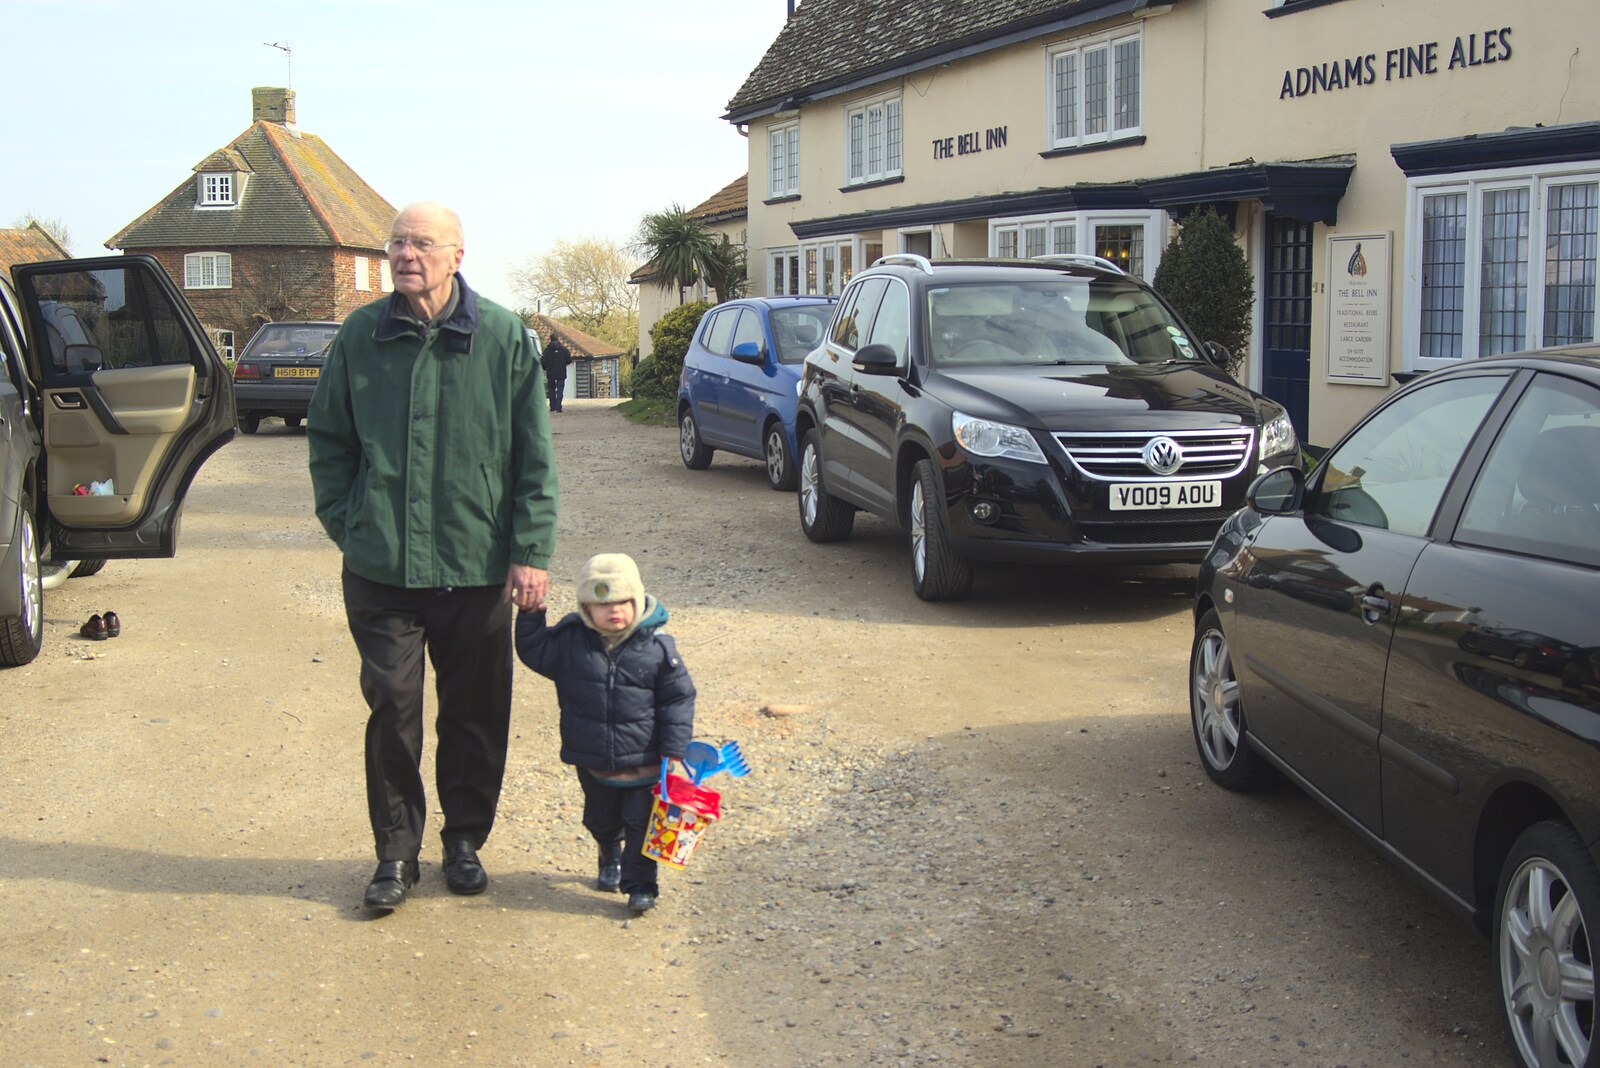 Grandad and Fred pass the Walberswick Bell Inn from A Trip To The Coast, Walberswick, Suffolk - 20th March 2011